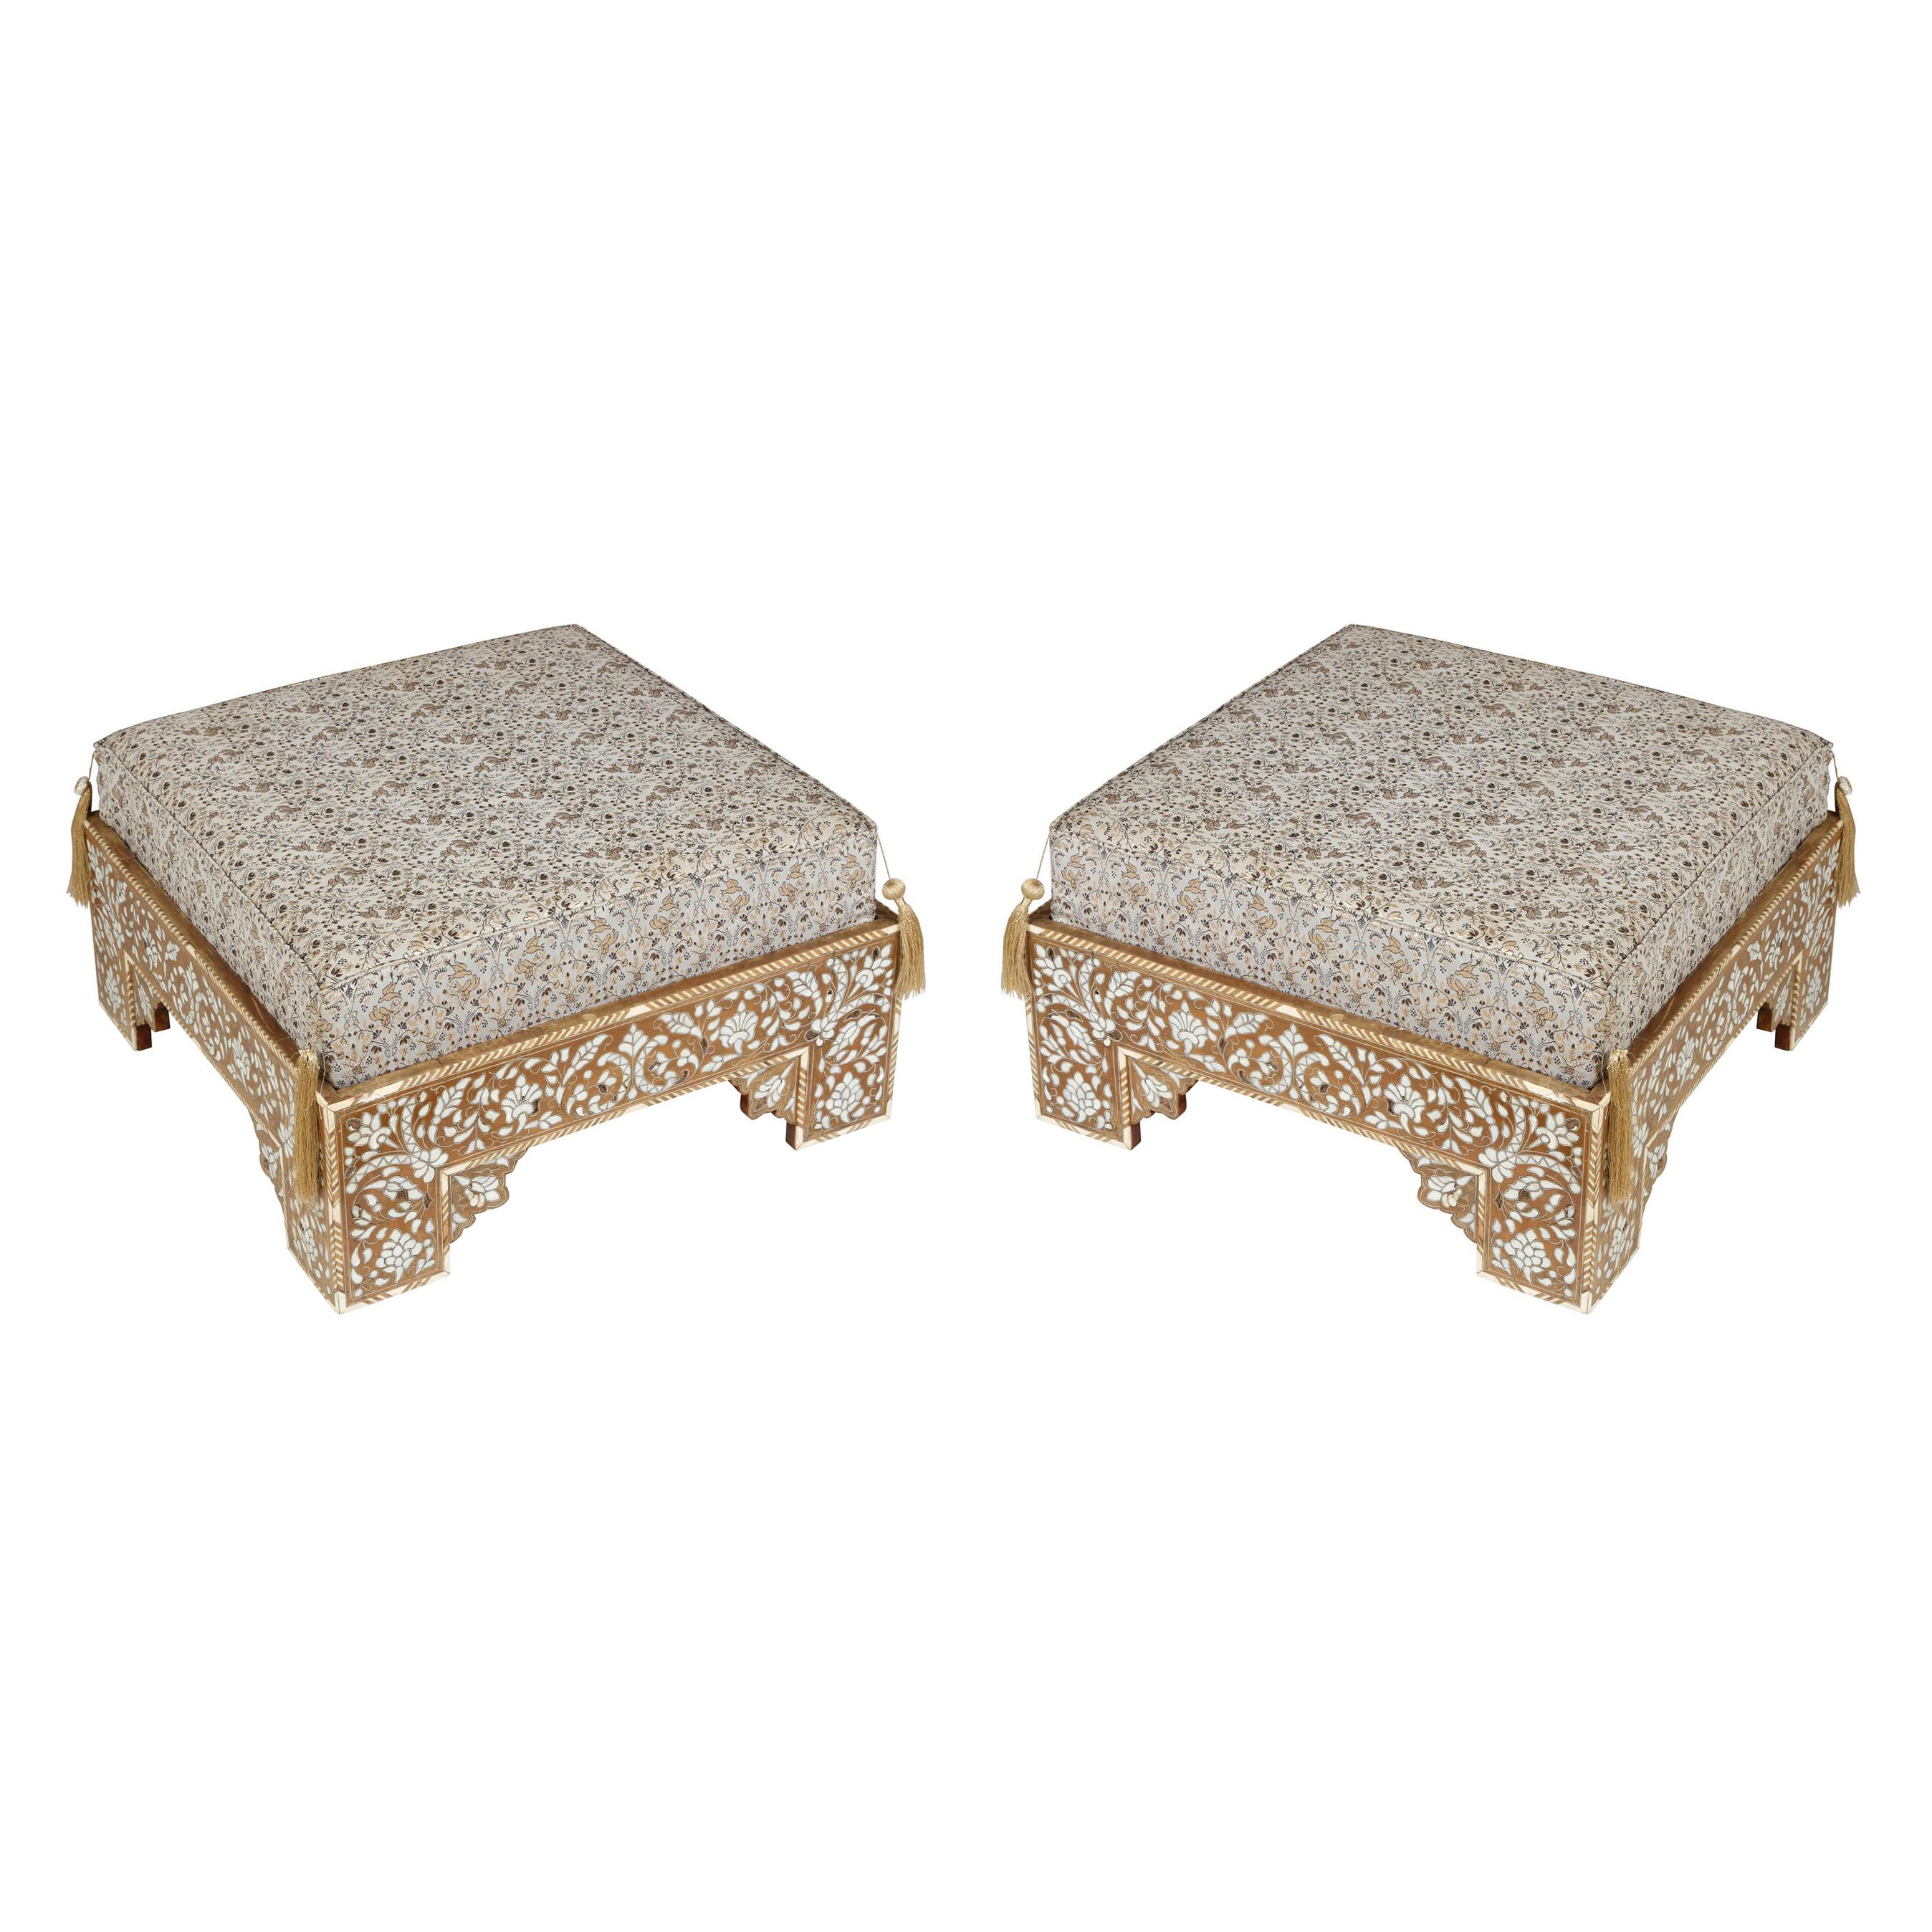 Pair of Moroccan Style Inlaid Square Ottomans